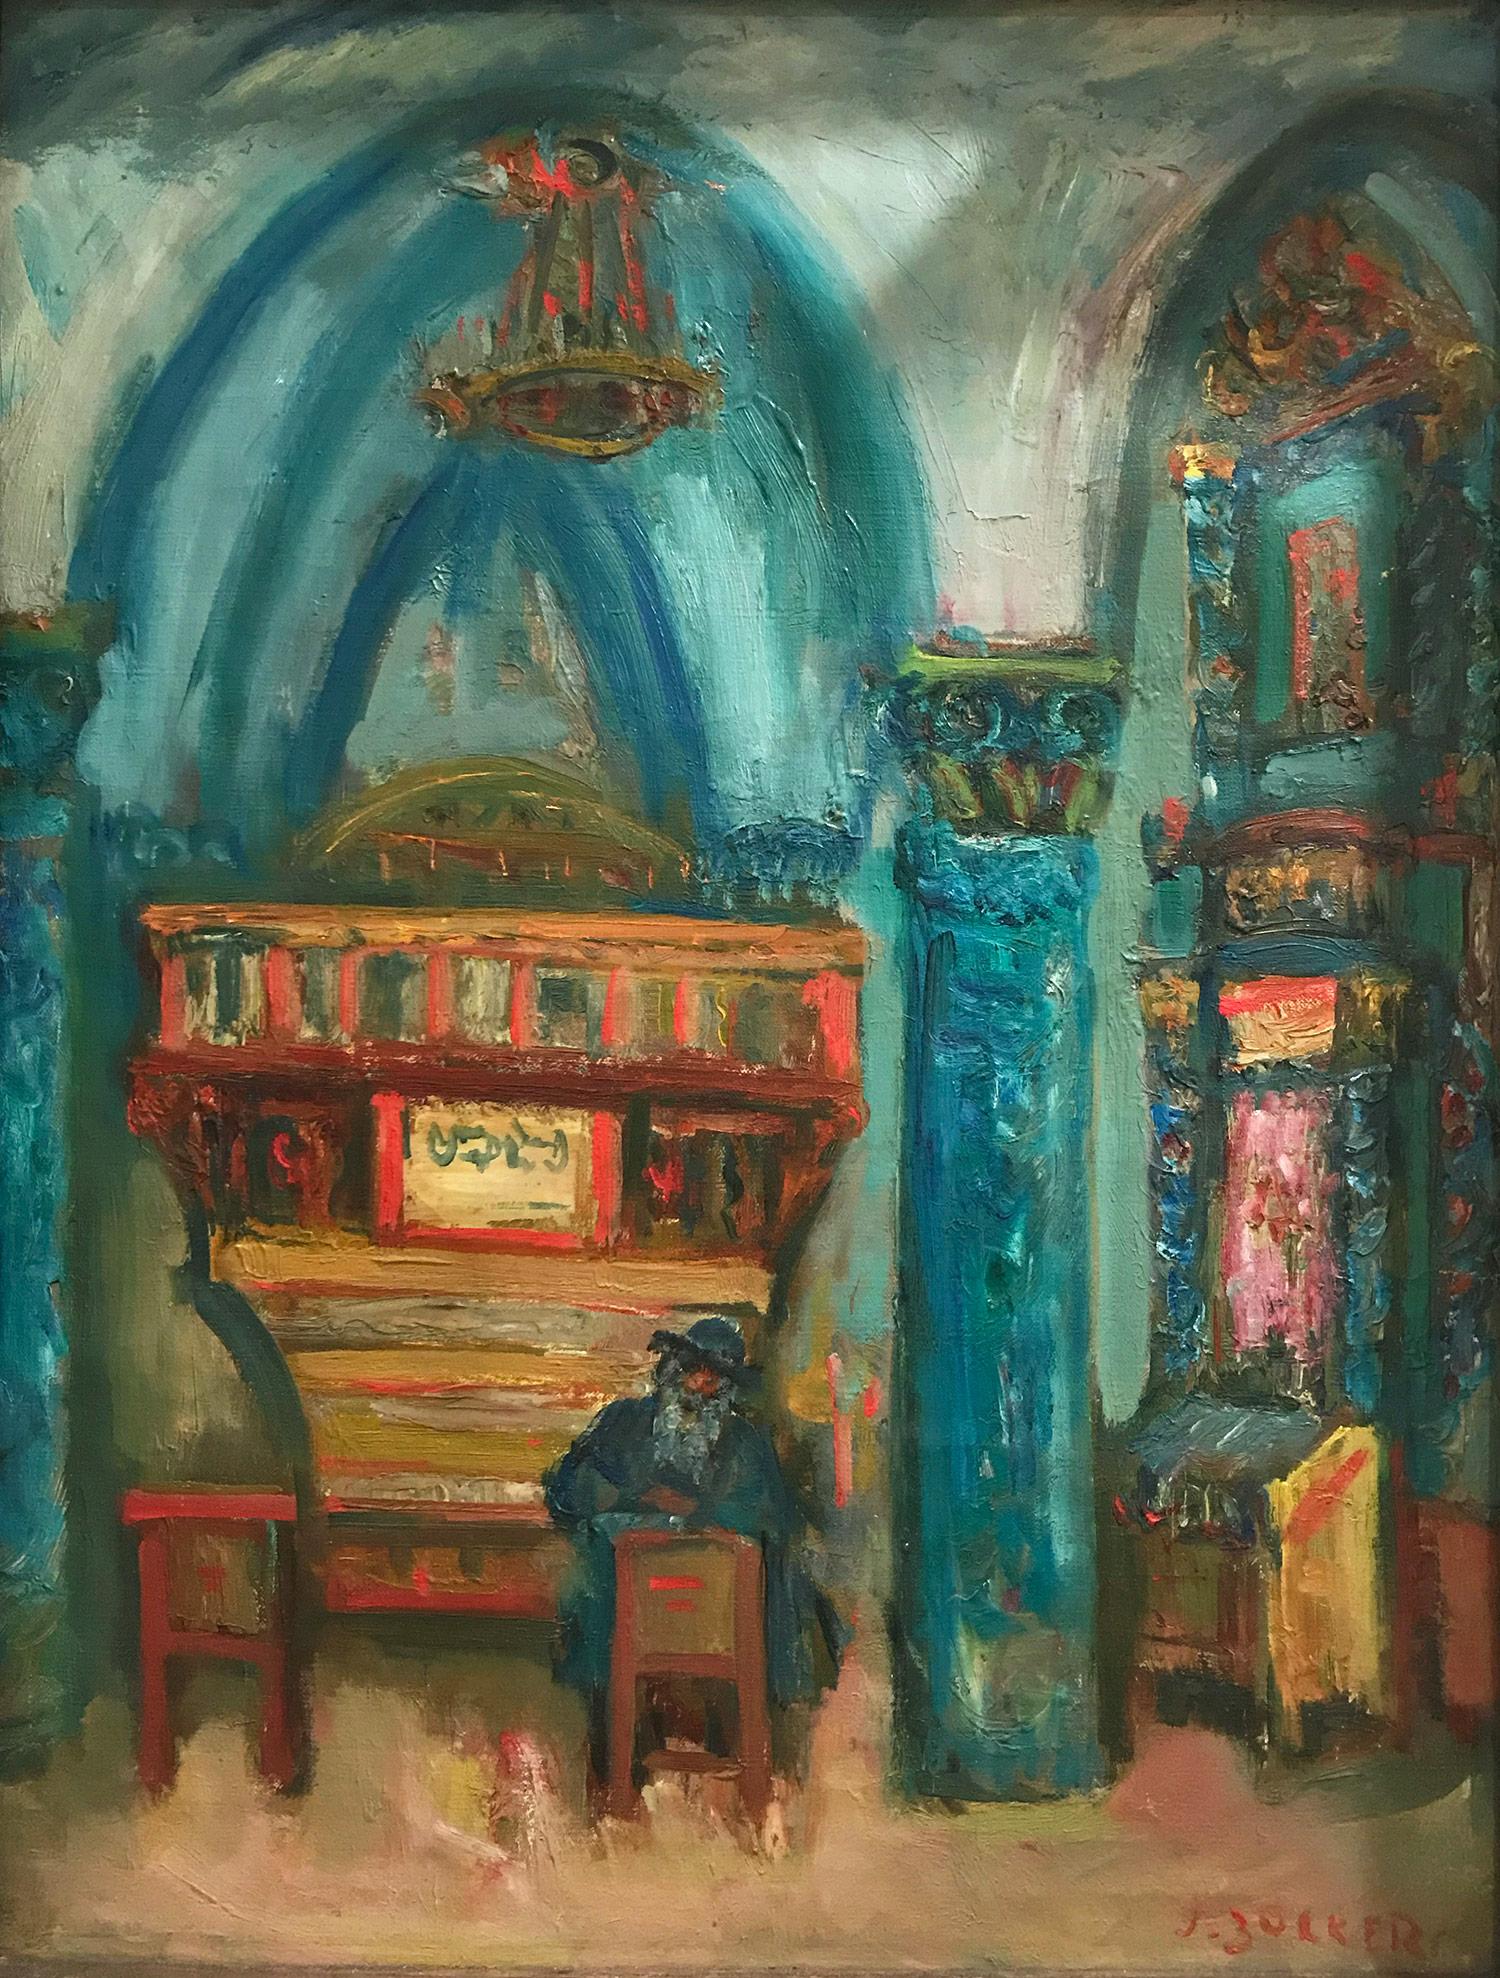 An outstanding oil painting depicting a religious figure seated in a Synagogue with decorated columns and in between arches. The bright colors and quick brush strokes are what make this piece so attractive and desirable. The piece is done in a